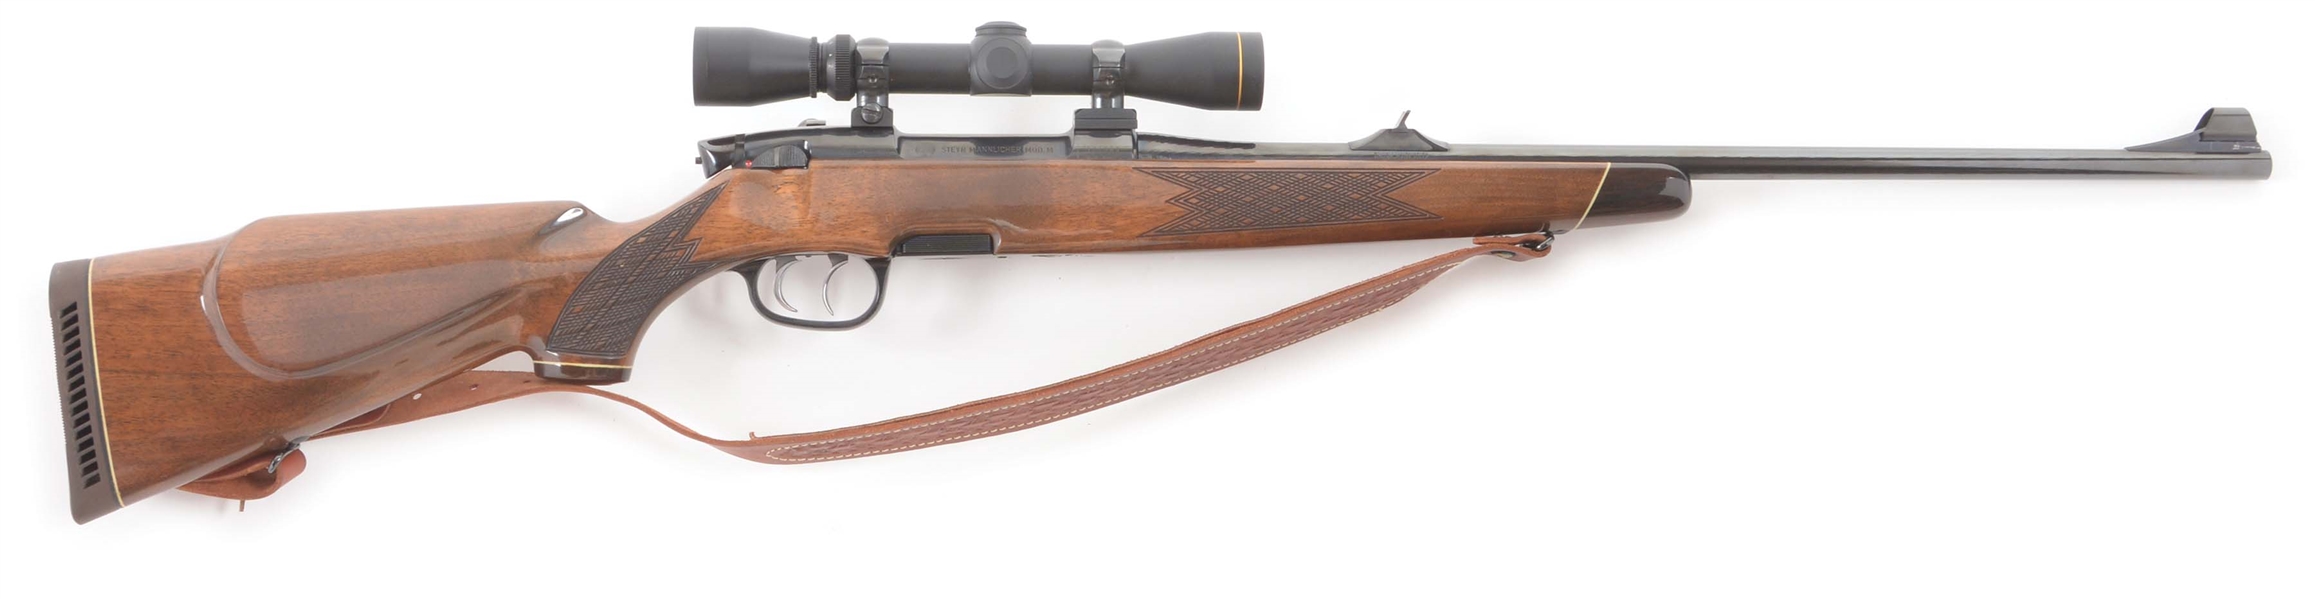 (M) LEFT HAND STEYR MODEL M BOLT ACTION RIFLE WITH LEUPOLD 2-7 SCOPE.